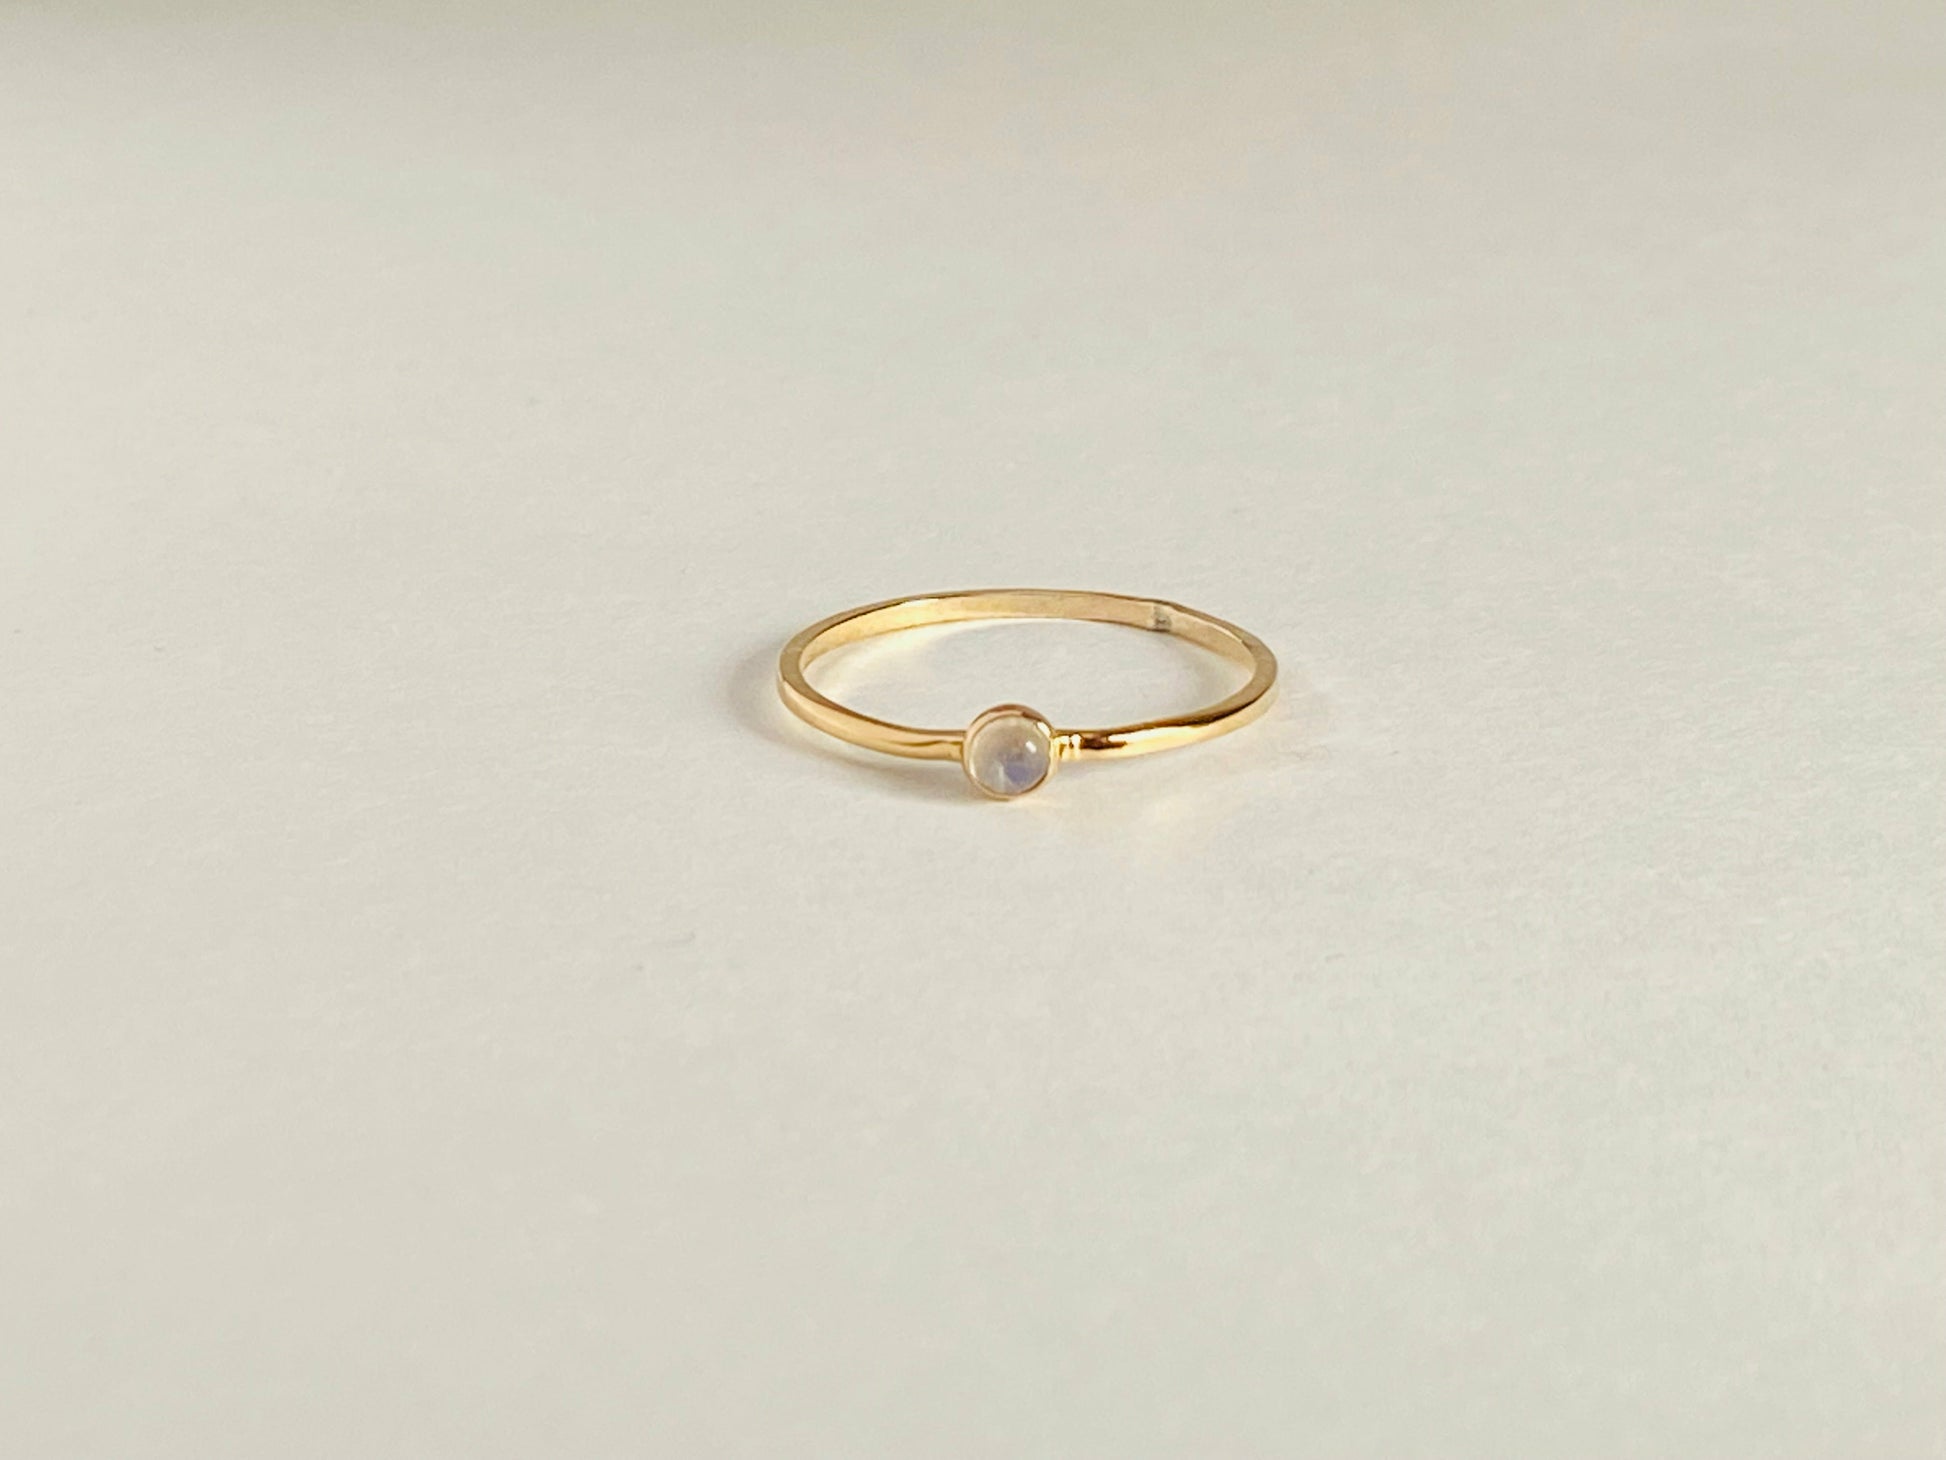 Small stackable gemstone rings, serrated bezel. Perfect for stacking, your choice of gemstone.